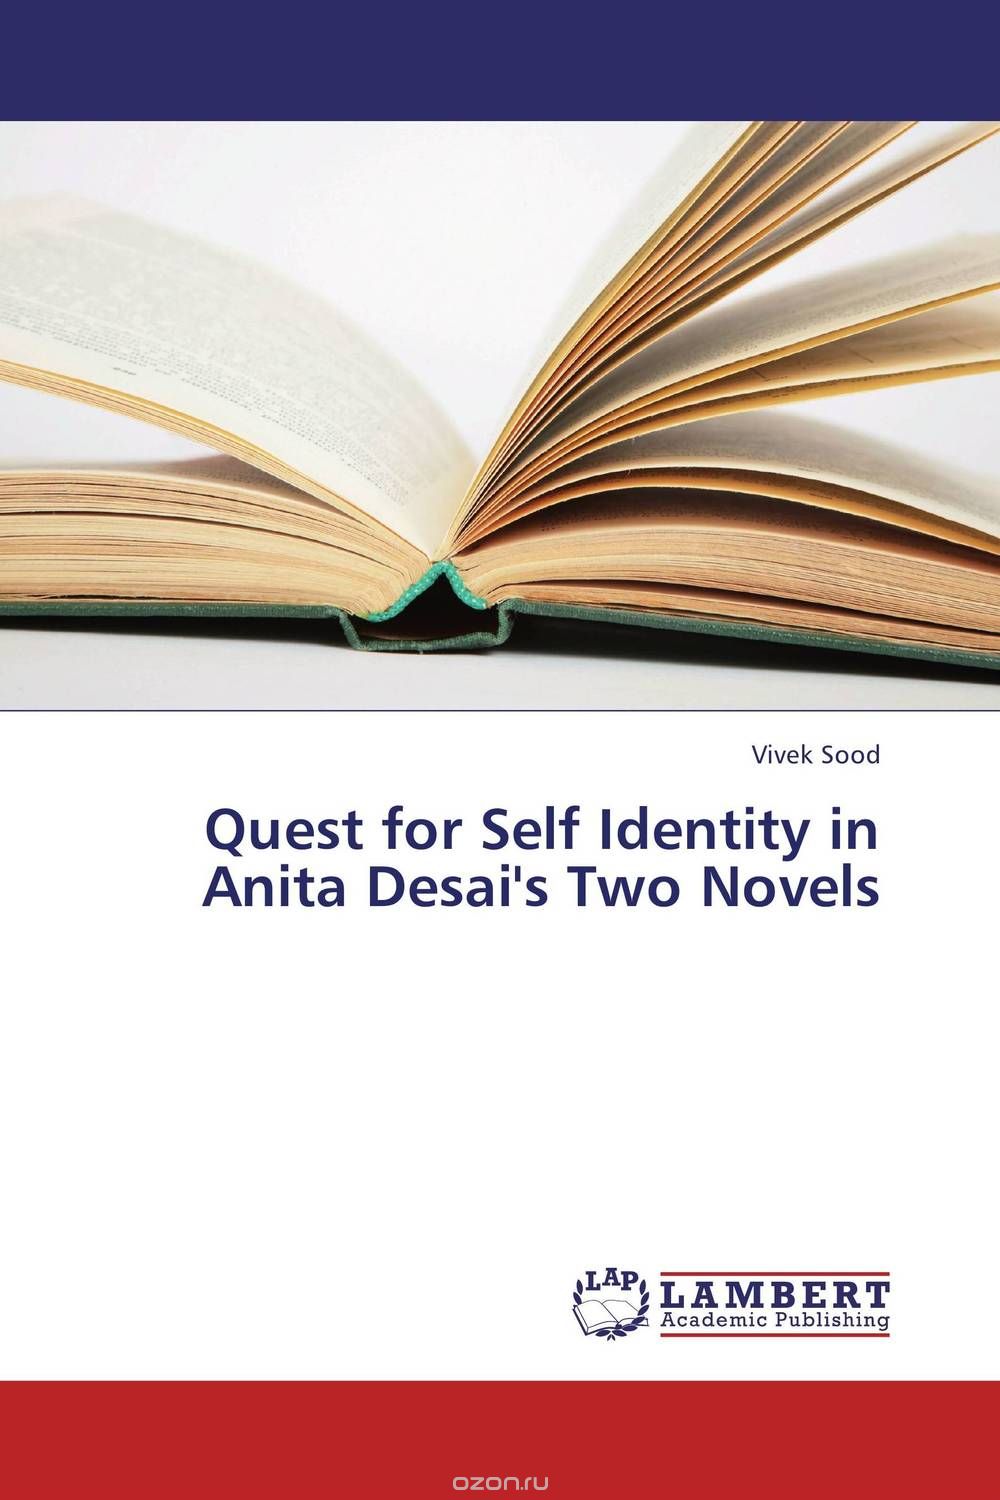 Quest for Self Identity in Anita Desai's Two Novels